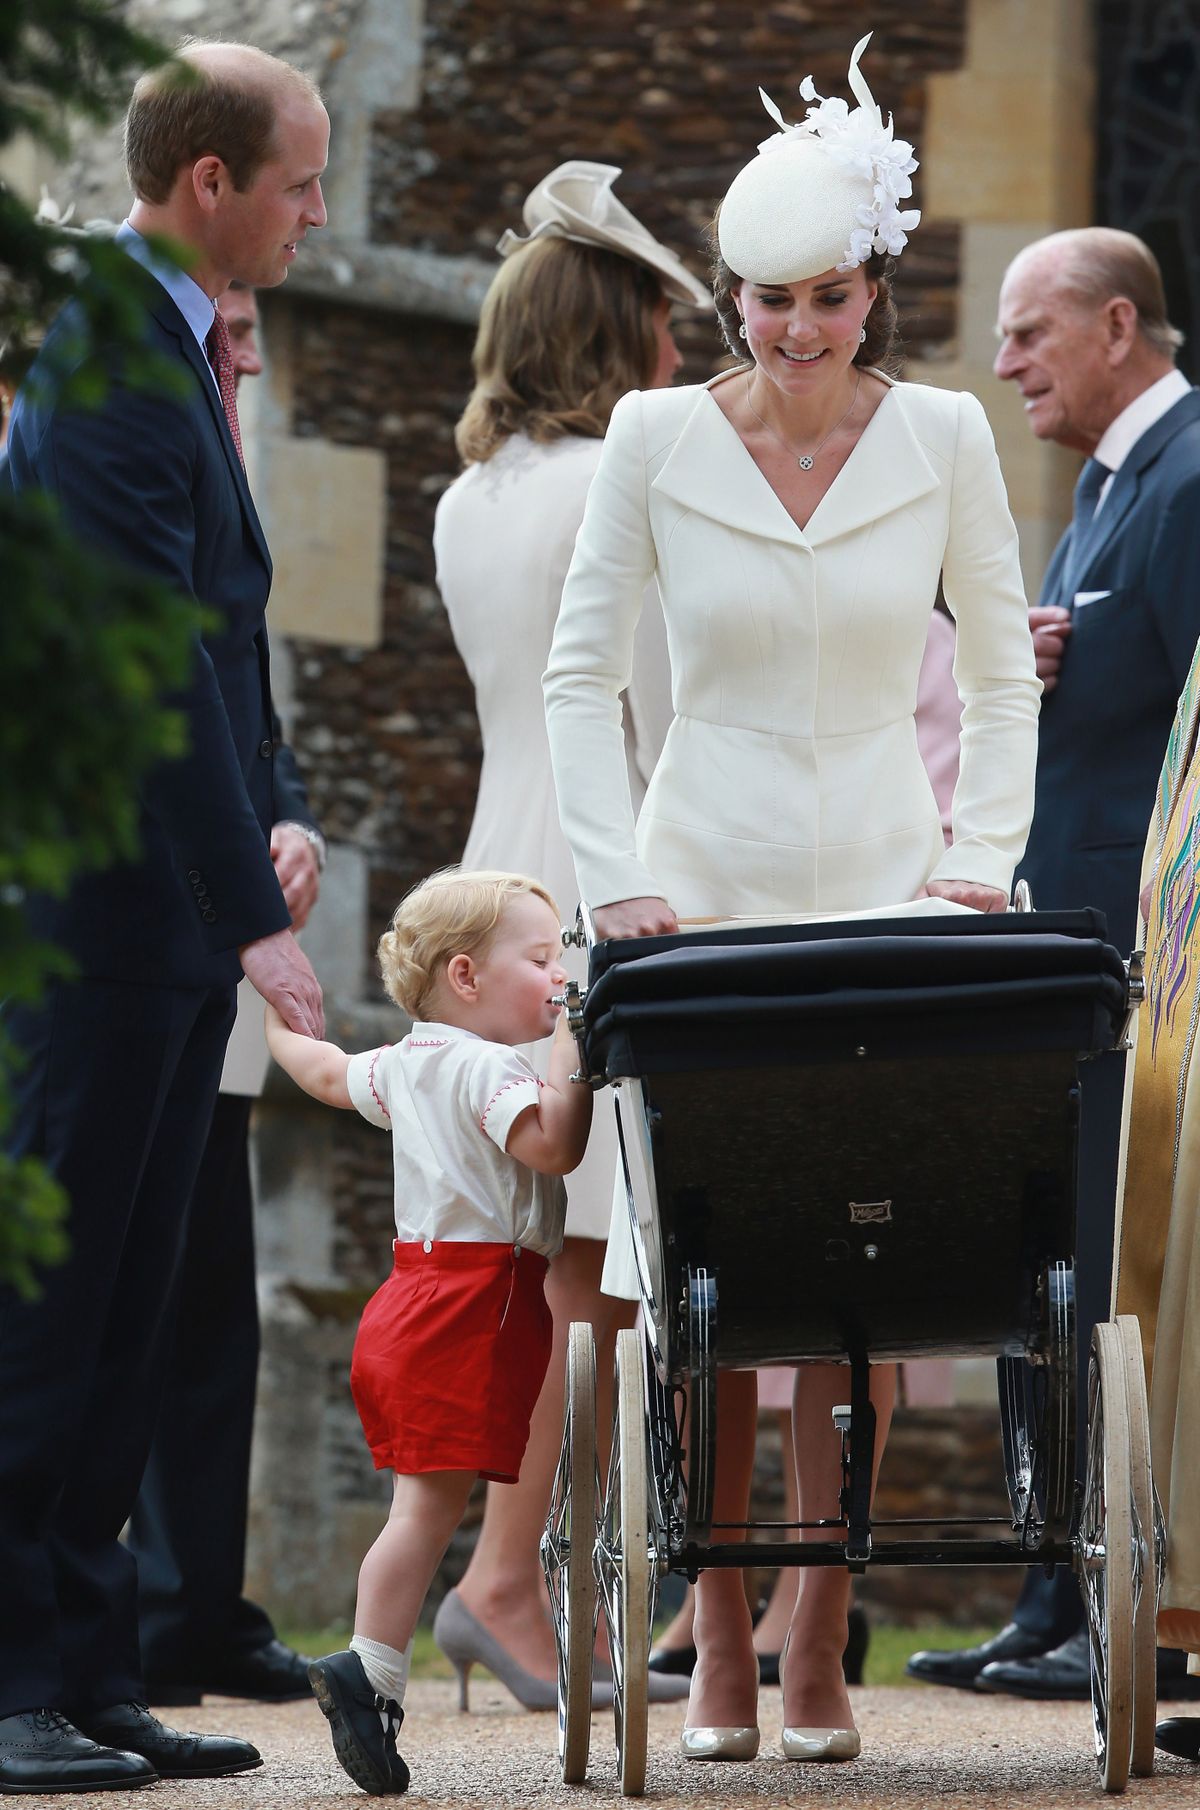 Prince George of Cambridge looks into the pram carrying his sister Princess Charlotte, pushed by Kate the Duchess of Cambridge, with Prince William after the christening Sunday on the Sandringham Estate. (Associated Press)